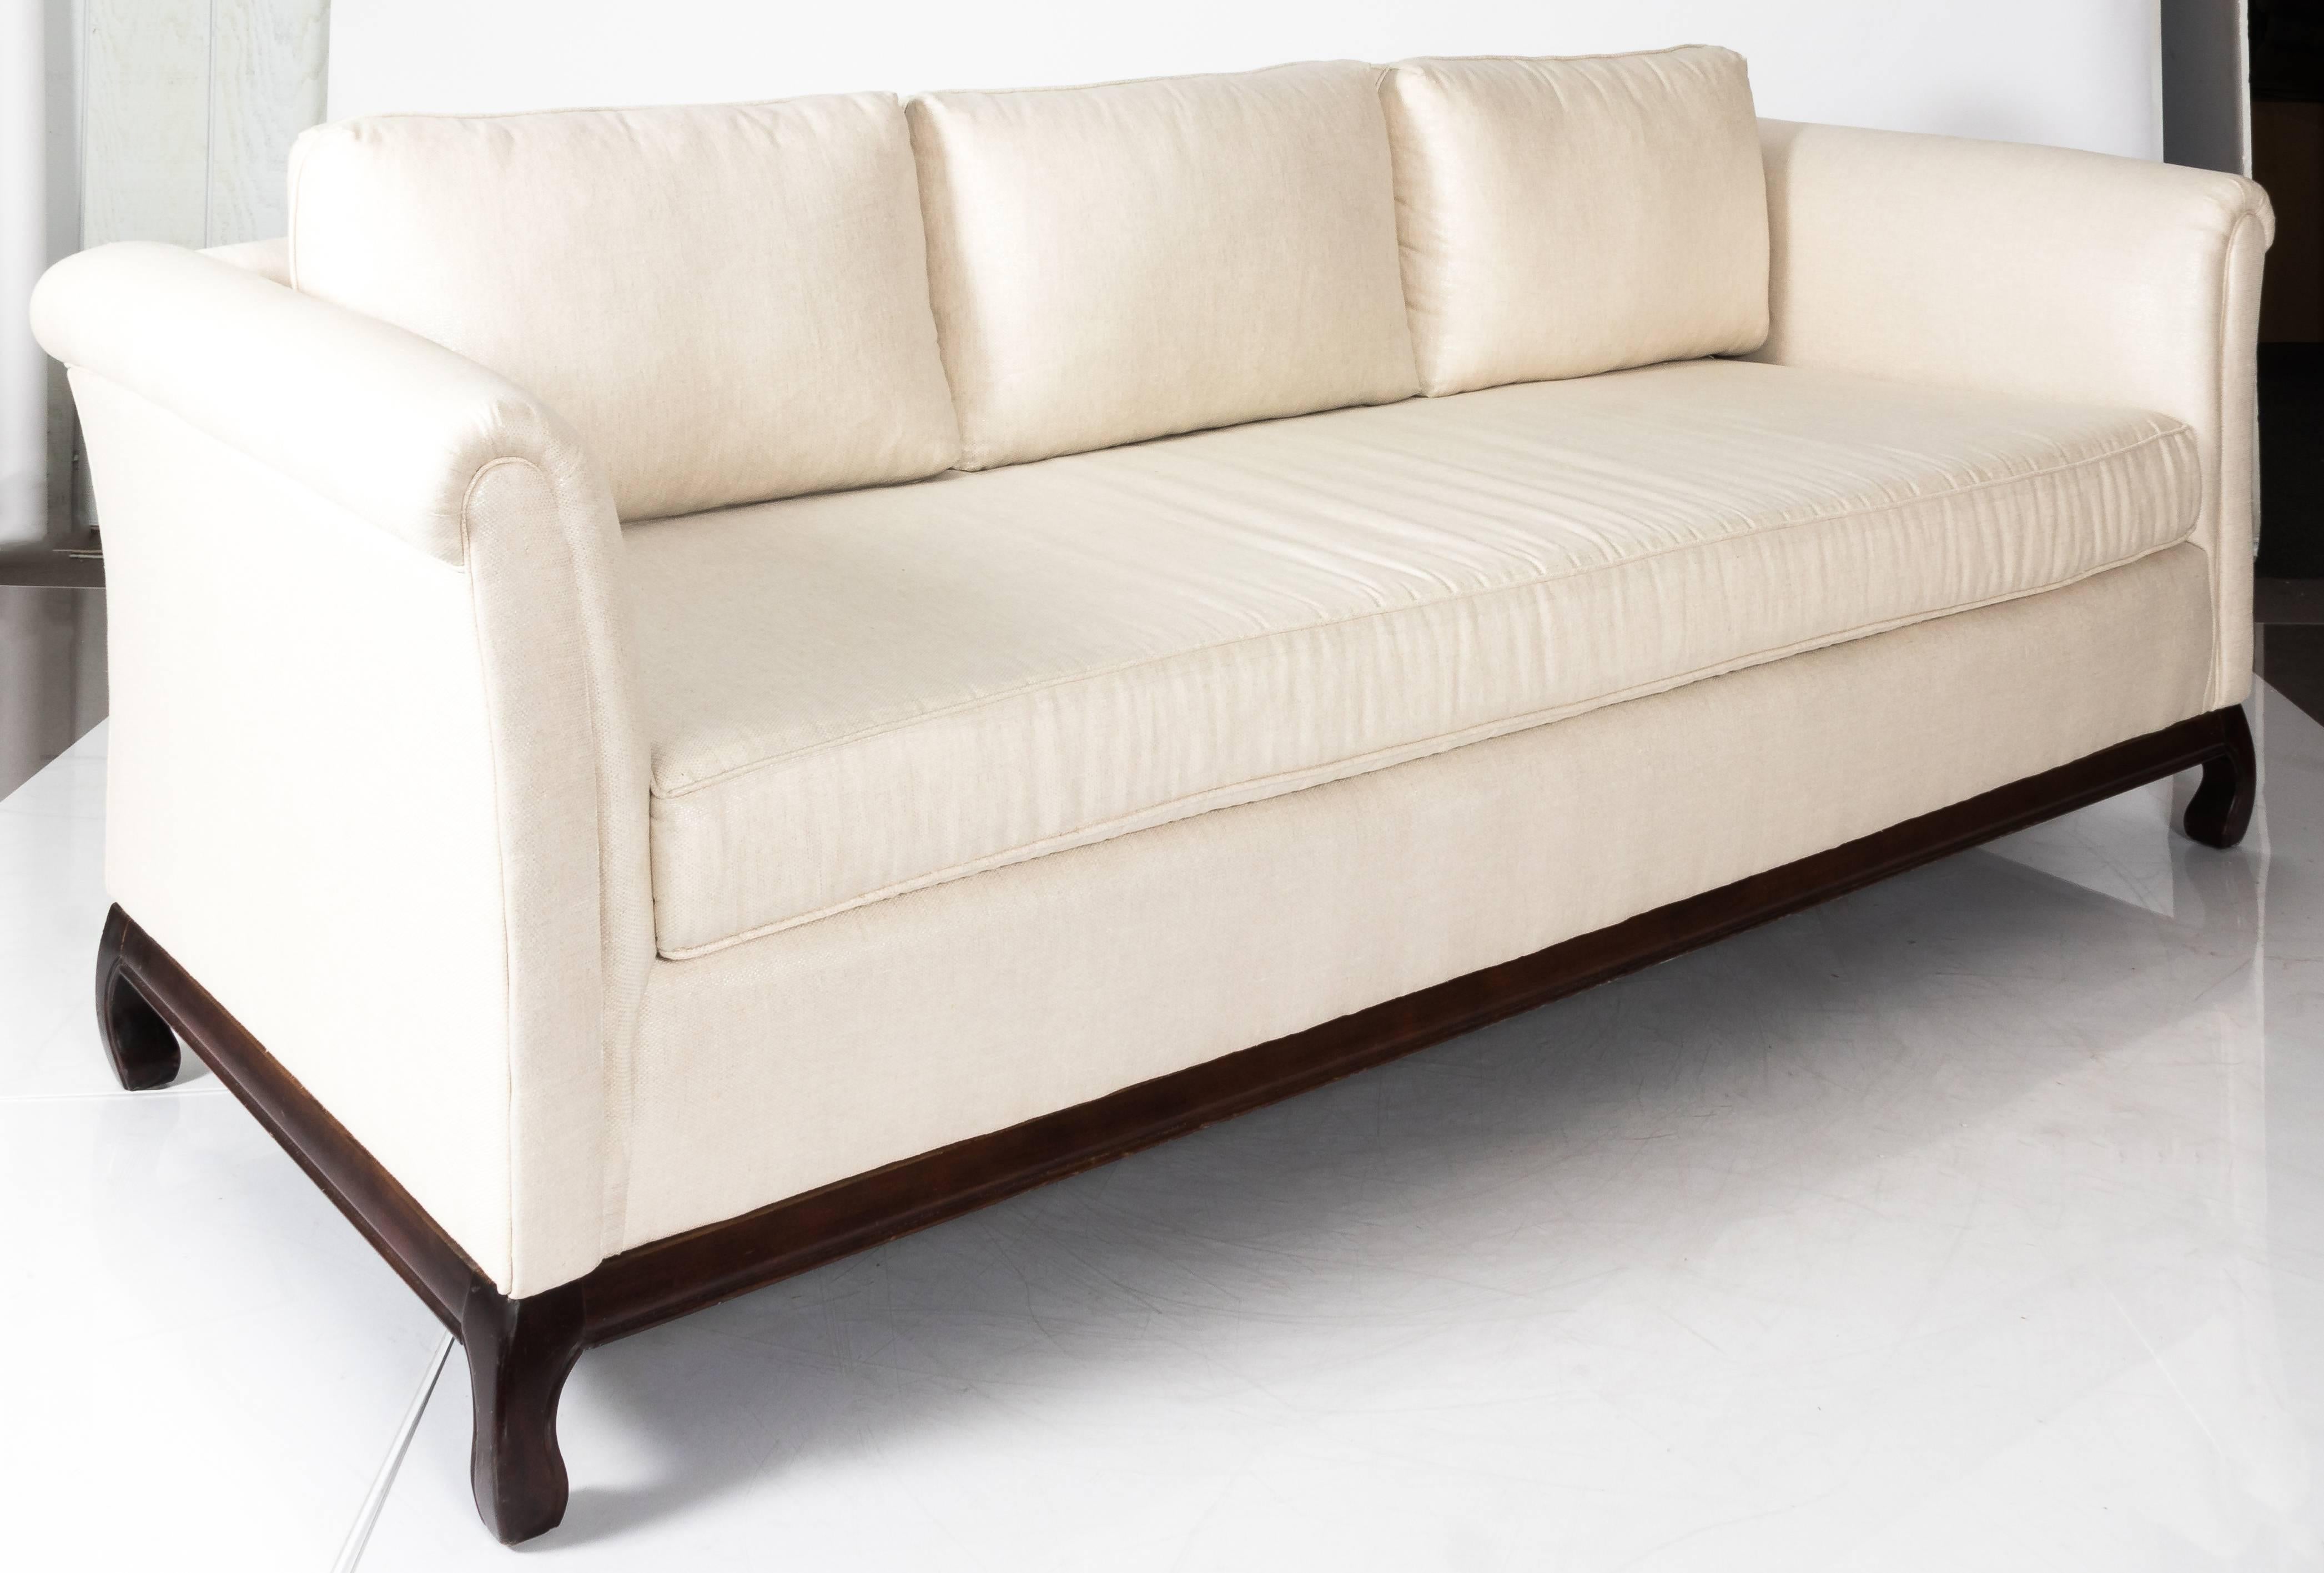 1970s Asian style sofa. Original dark walnut Ming style base. Newly upholstered in off-white metallic linen. New single foam cushion and three back pillows. This item is available to view at The Antique & Artisan Gallery in Stamford, CT.
Measure: